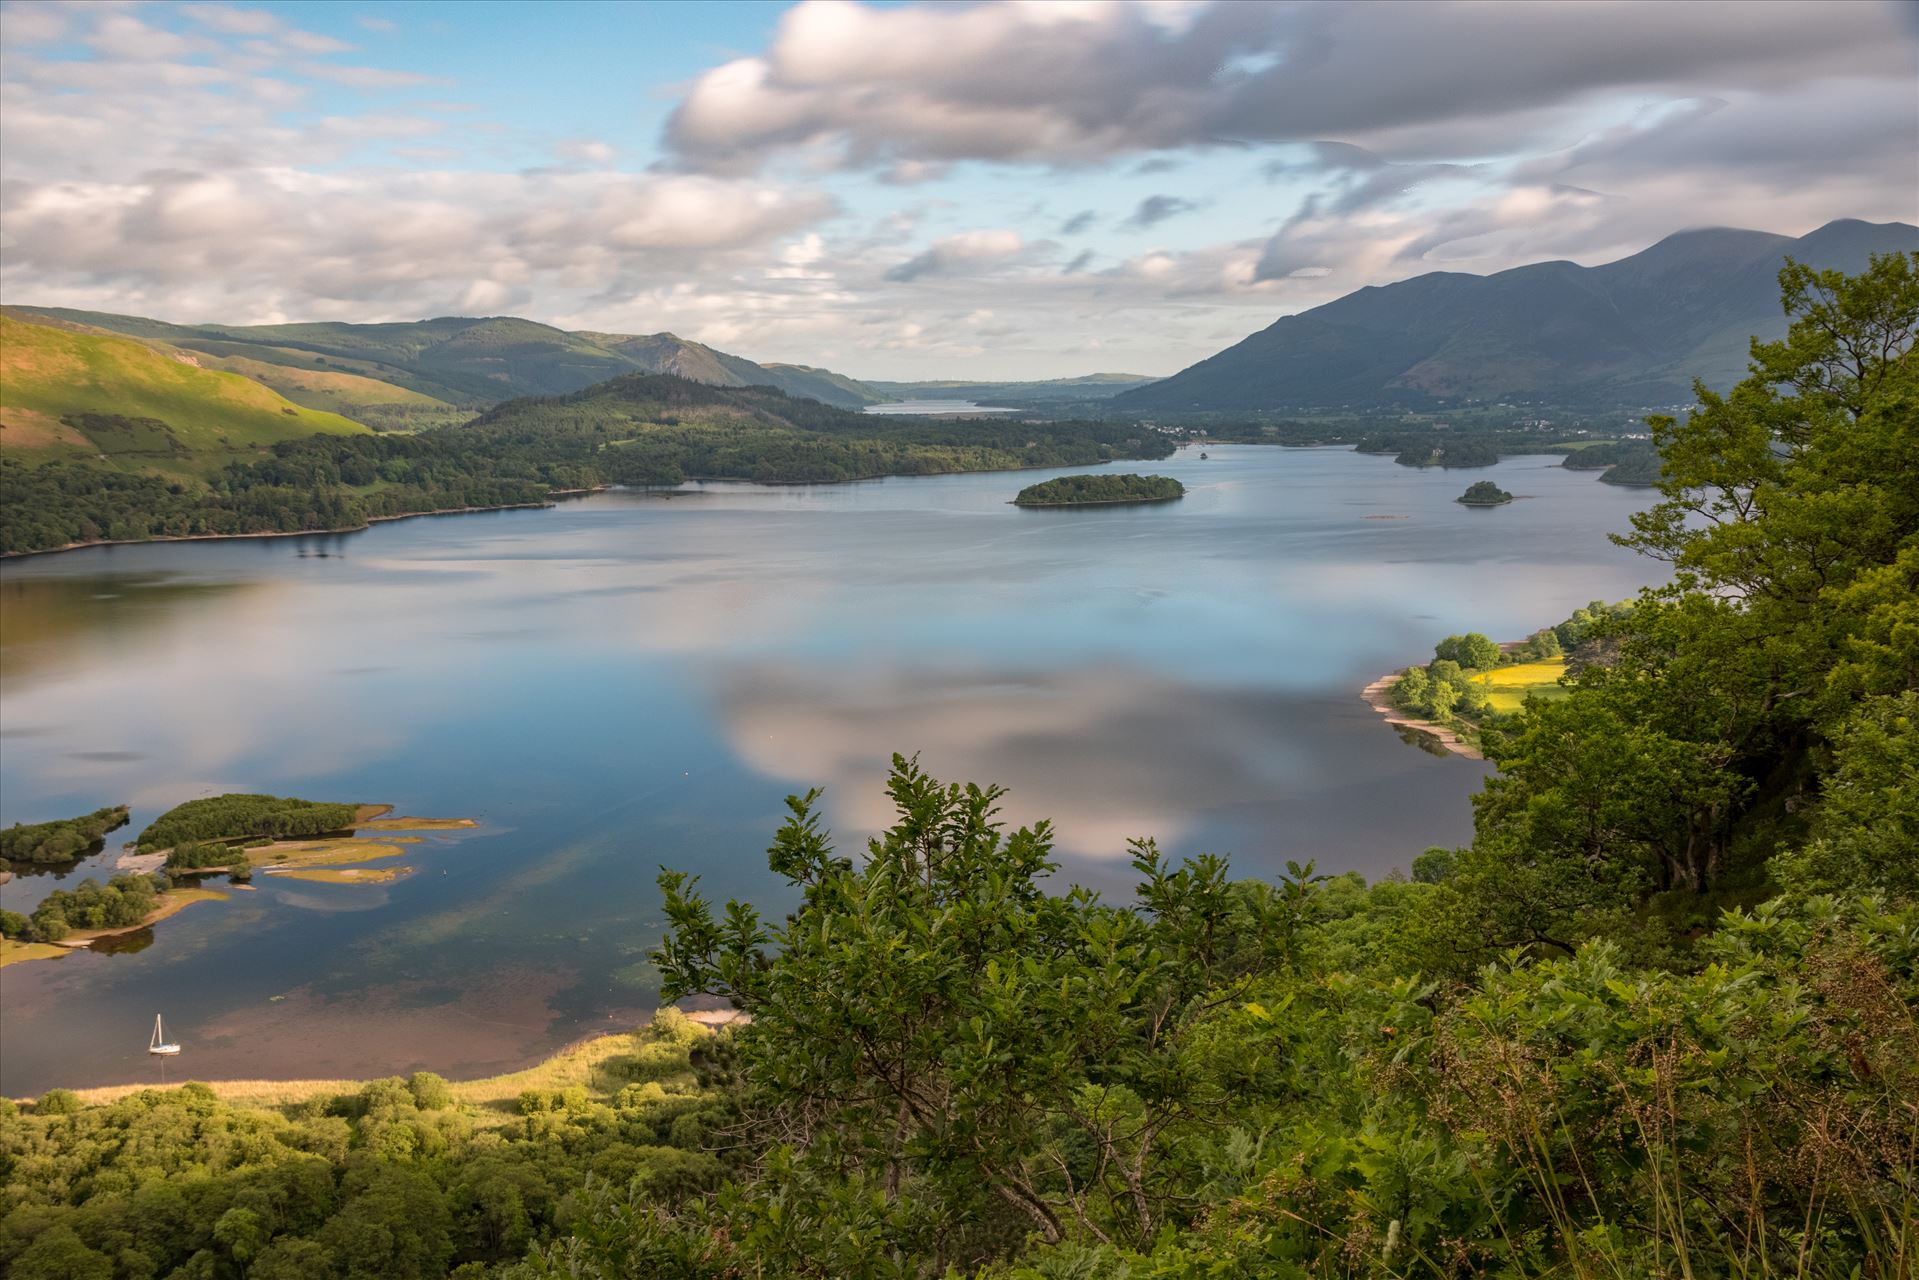 Surprise View looking over Derwent Water Early morning shot at Surprise View in the Lake District overlooking Derwent Water with Keswick to the top right and Catbells just visible to the left. by Tony Keogh Photography